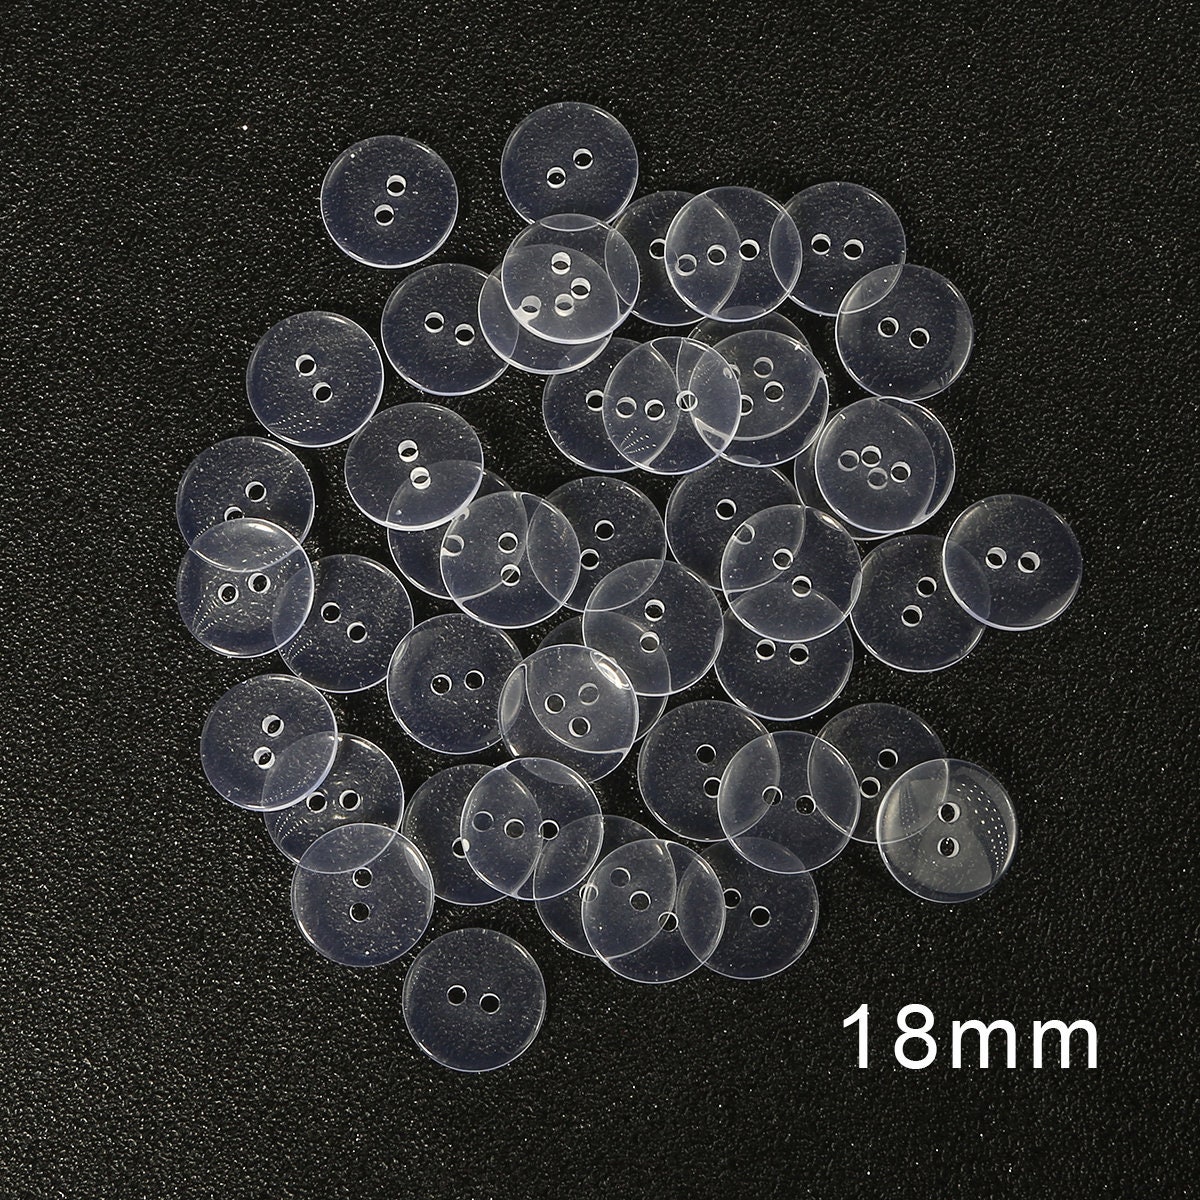 50 Clear Four Holes Buttons, Transparent, Invisible Buttons, 10mm, 12mm,  15mm, 20mm, 25mm, Small to Large Size, 1inch, Smooth Edge, Glossy 